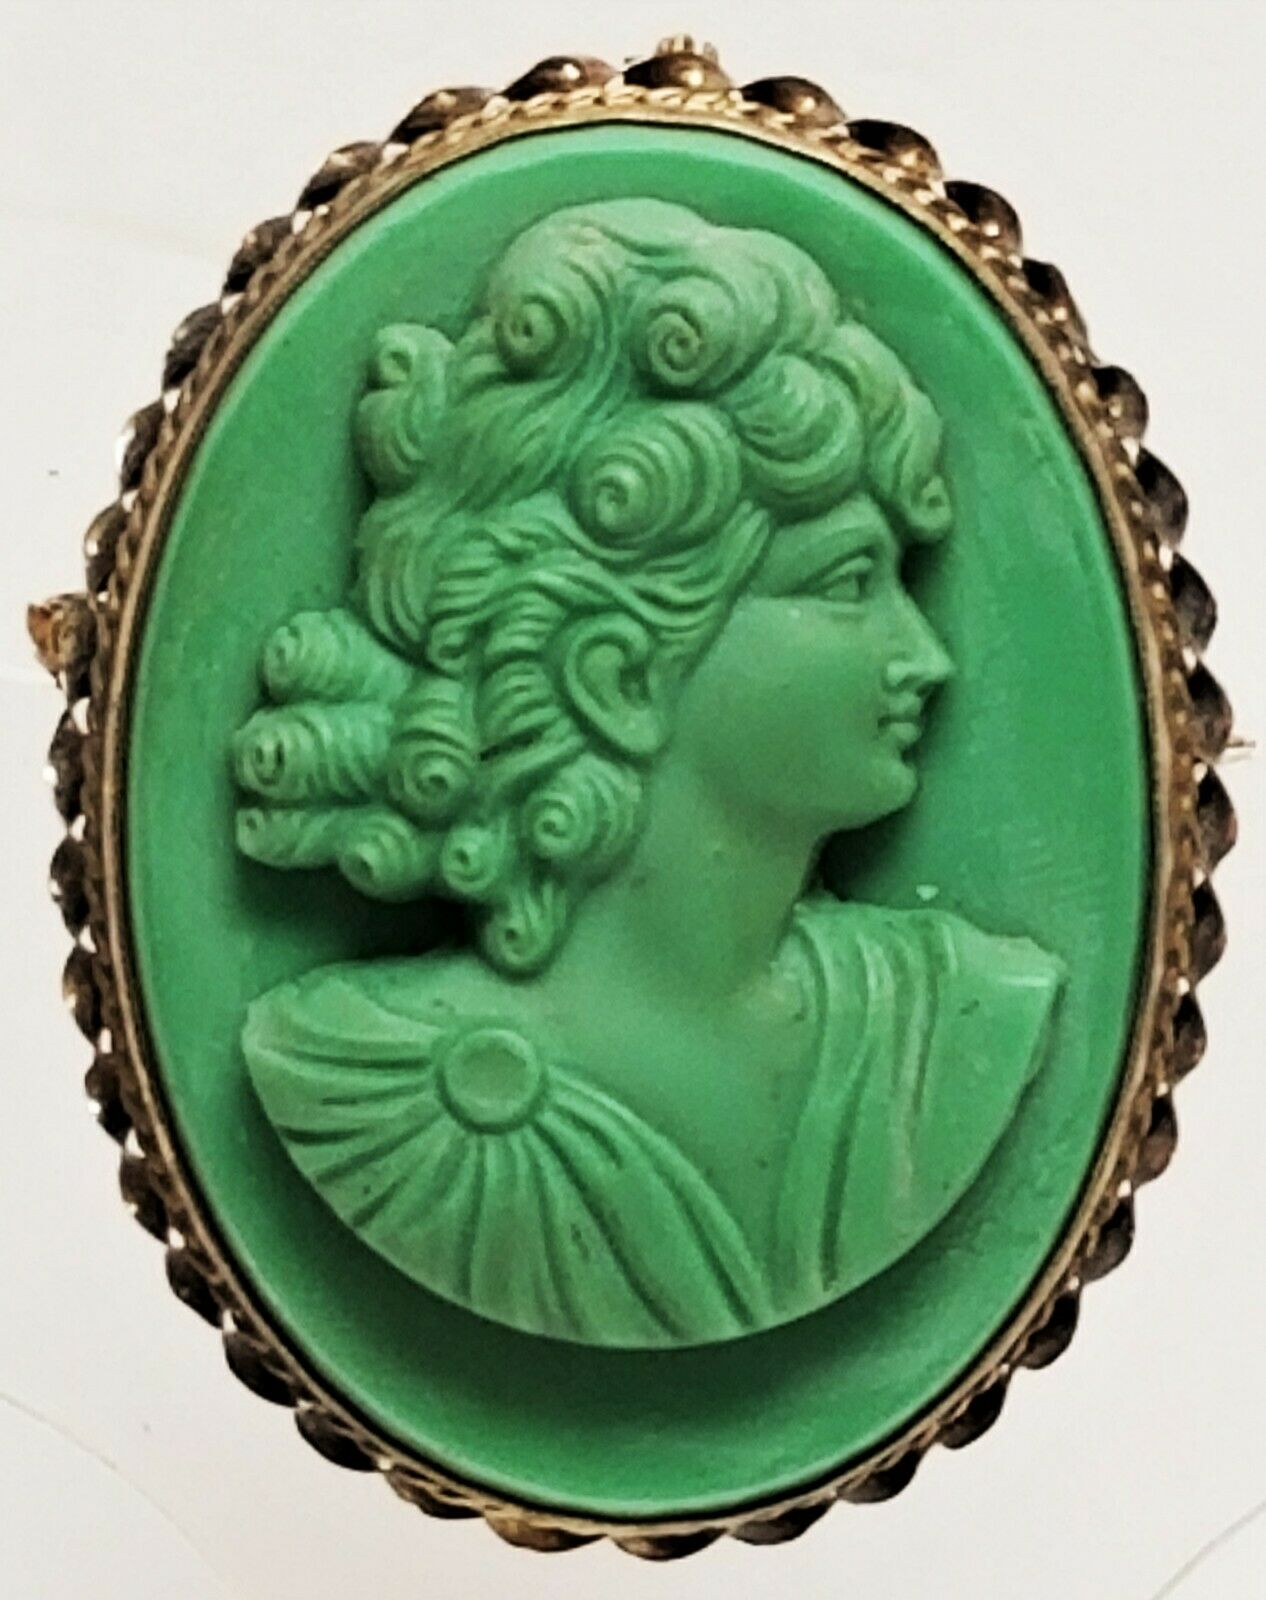 Antique Molded Green Grass Cameo Gold Filled Brooch / Pendant Twisted Border